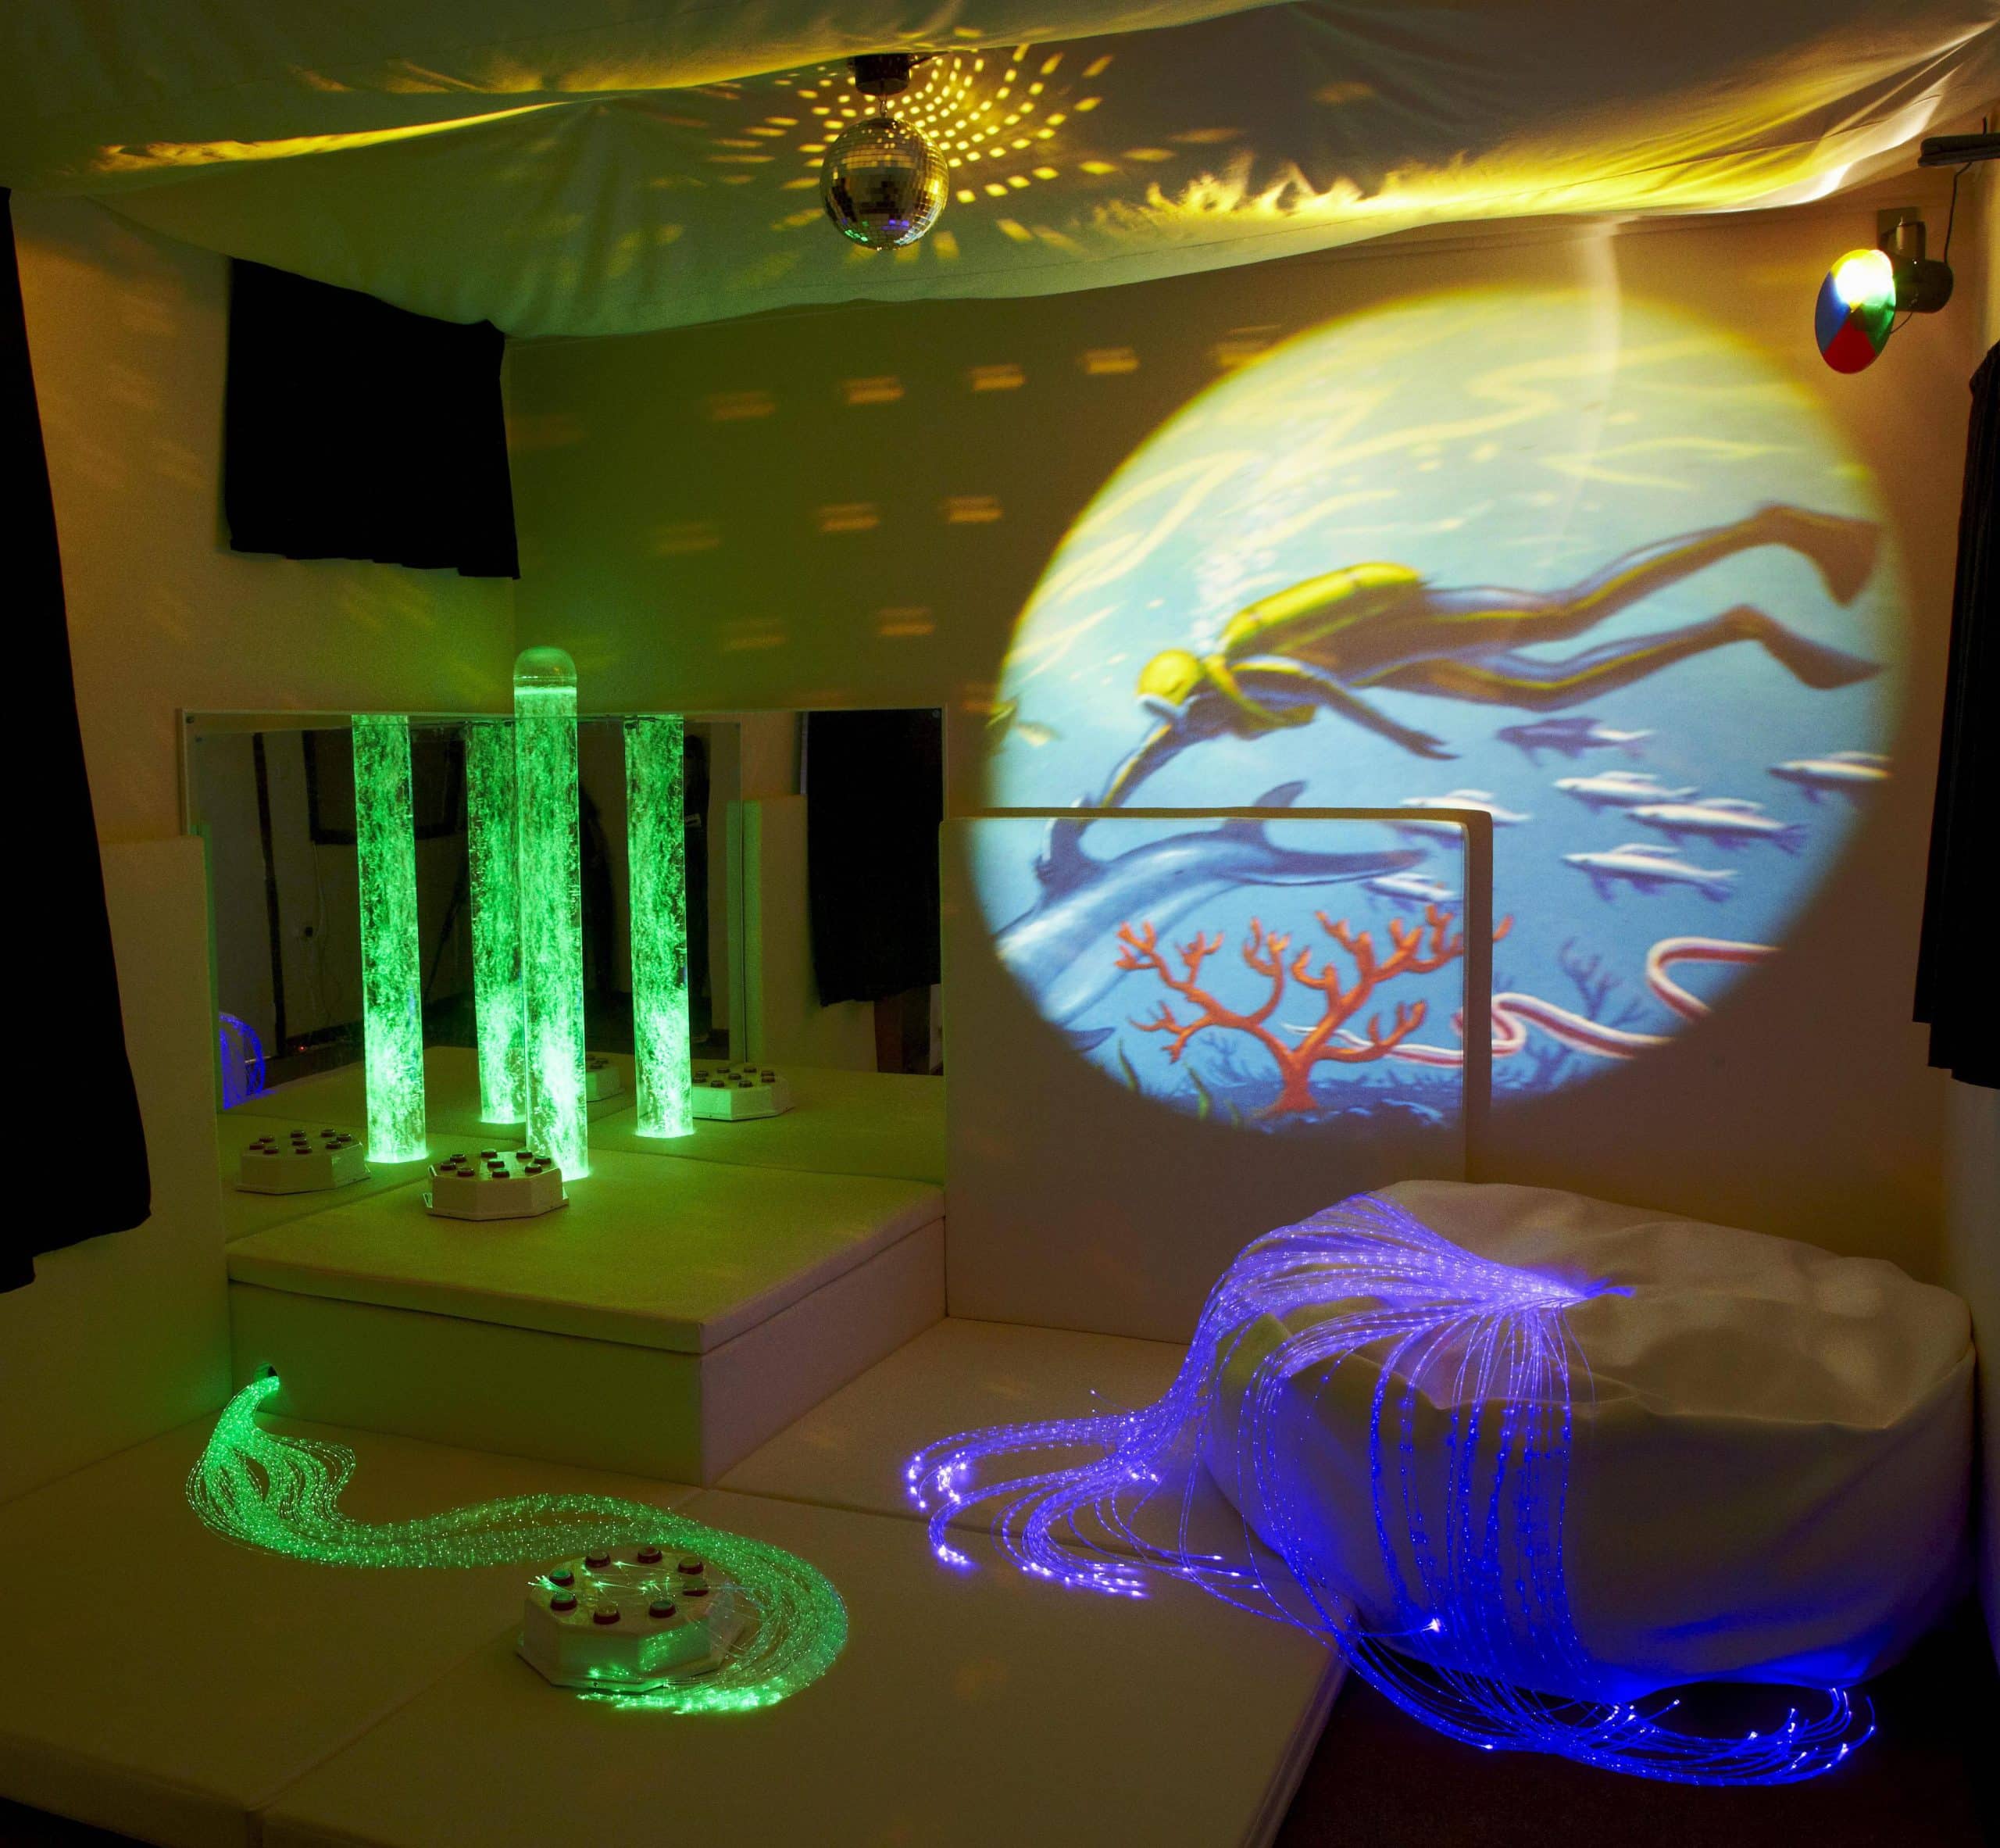 How can a Sensory Room help people who suffer from Autism?